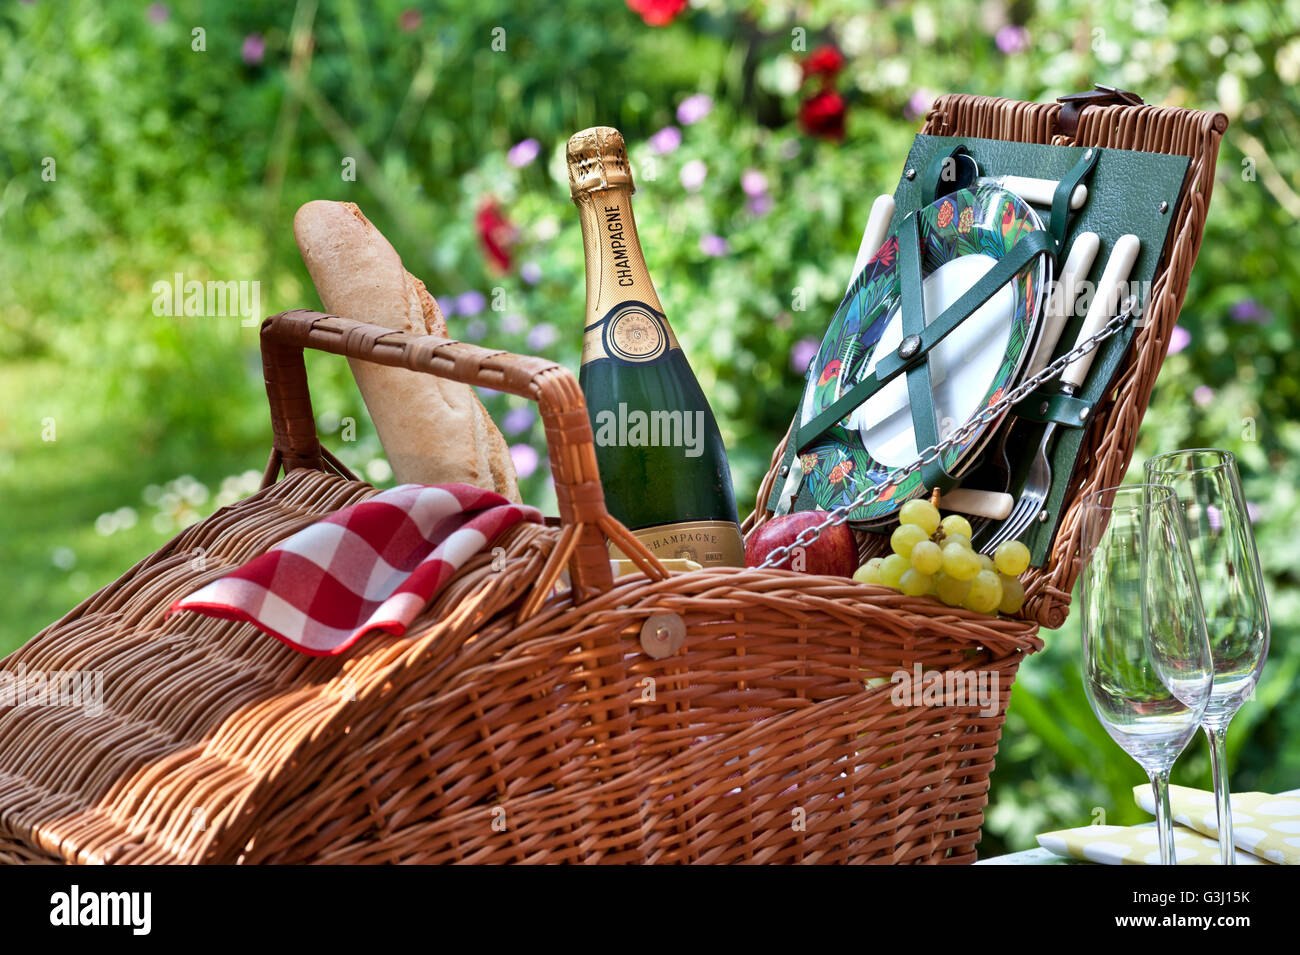 Picnic French champagne bottle baguette grapes and wicker picnic basket in sunny floral luxury alfresco garden outdoor situation Stock Photo